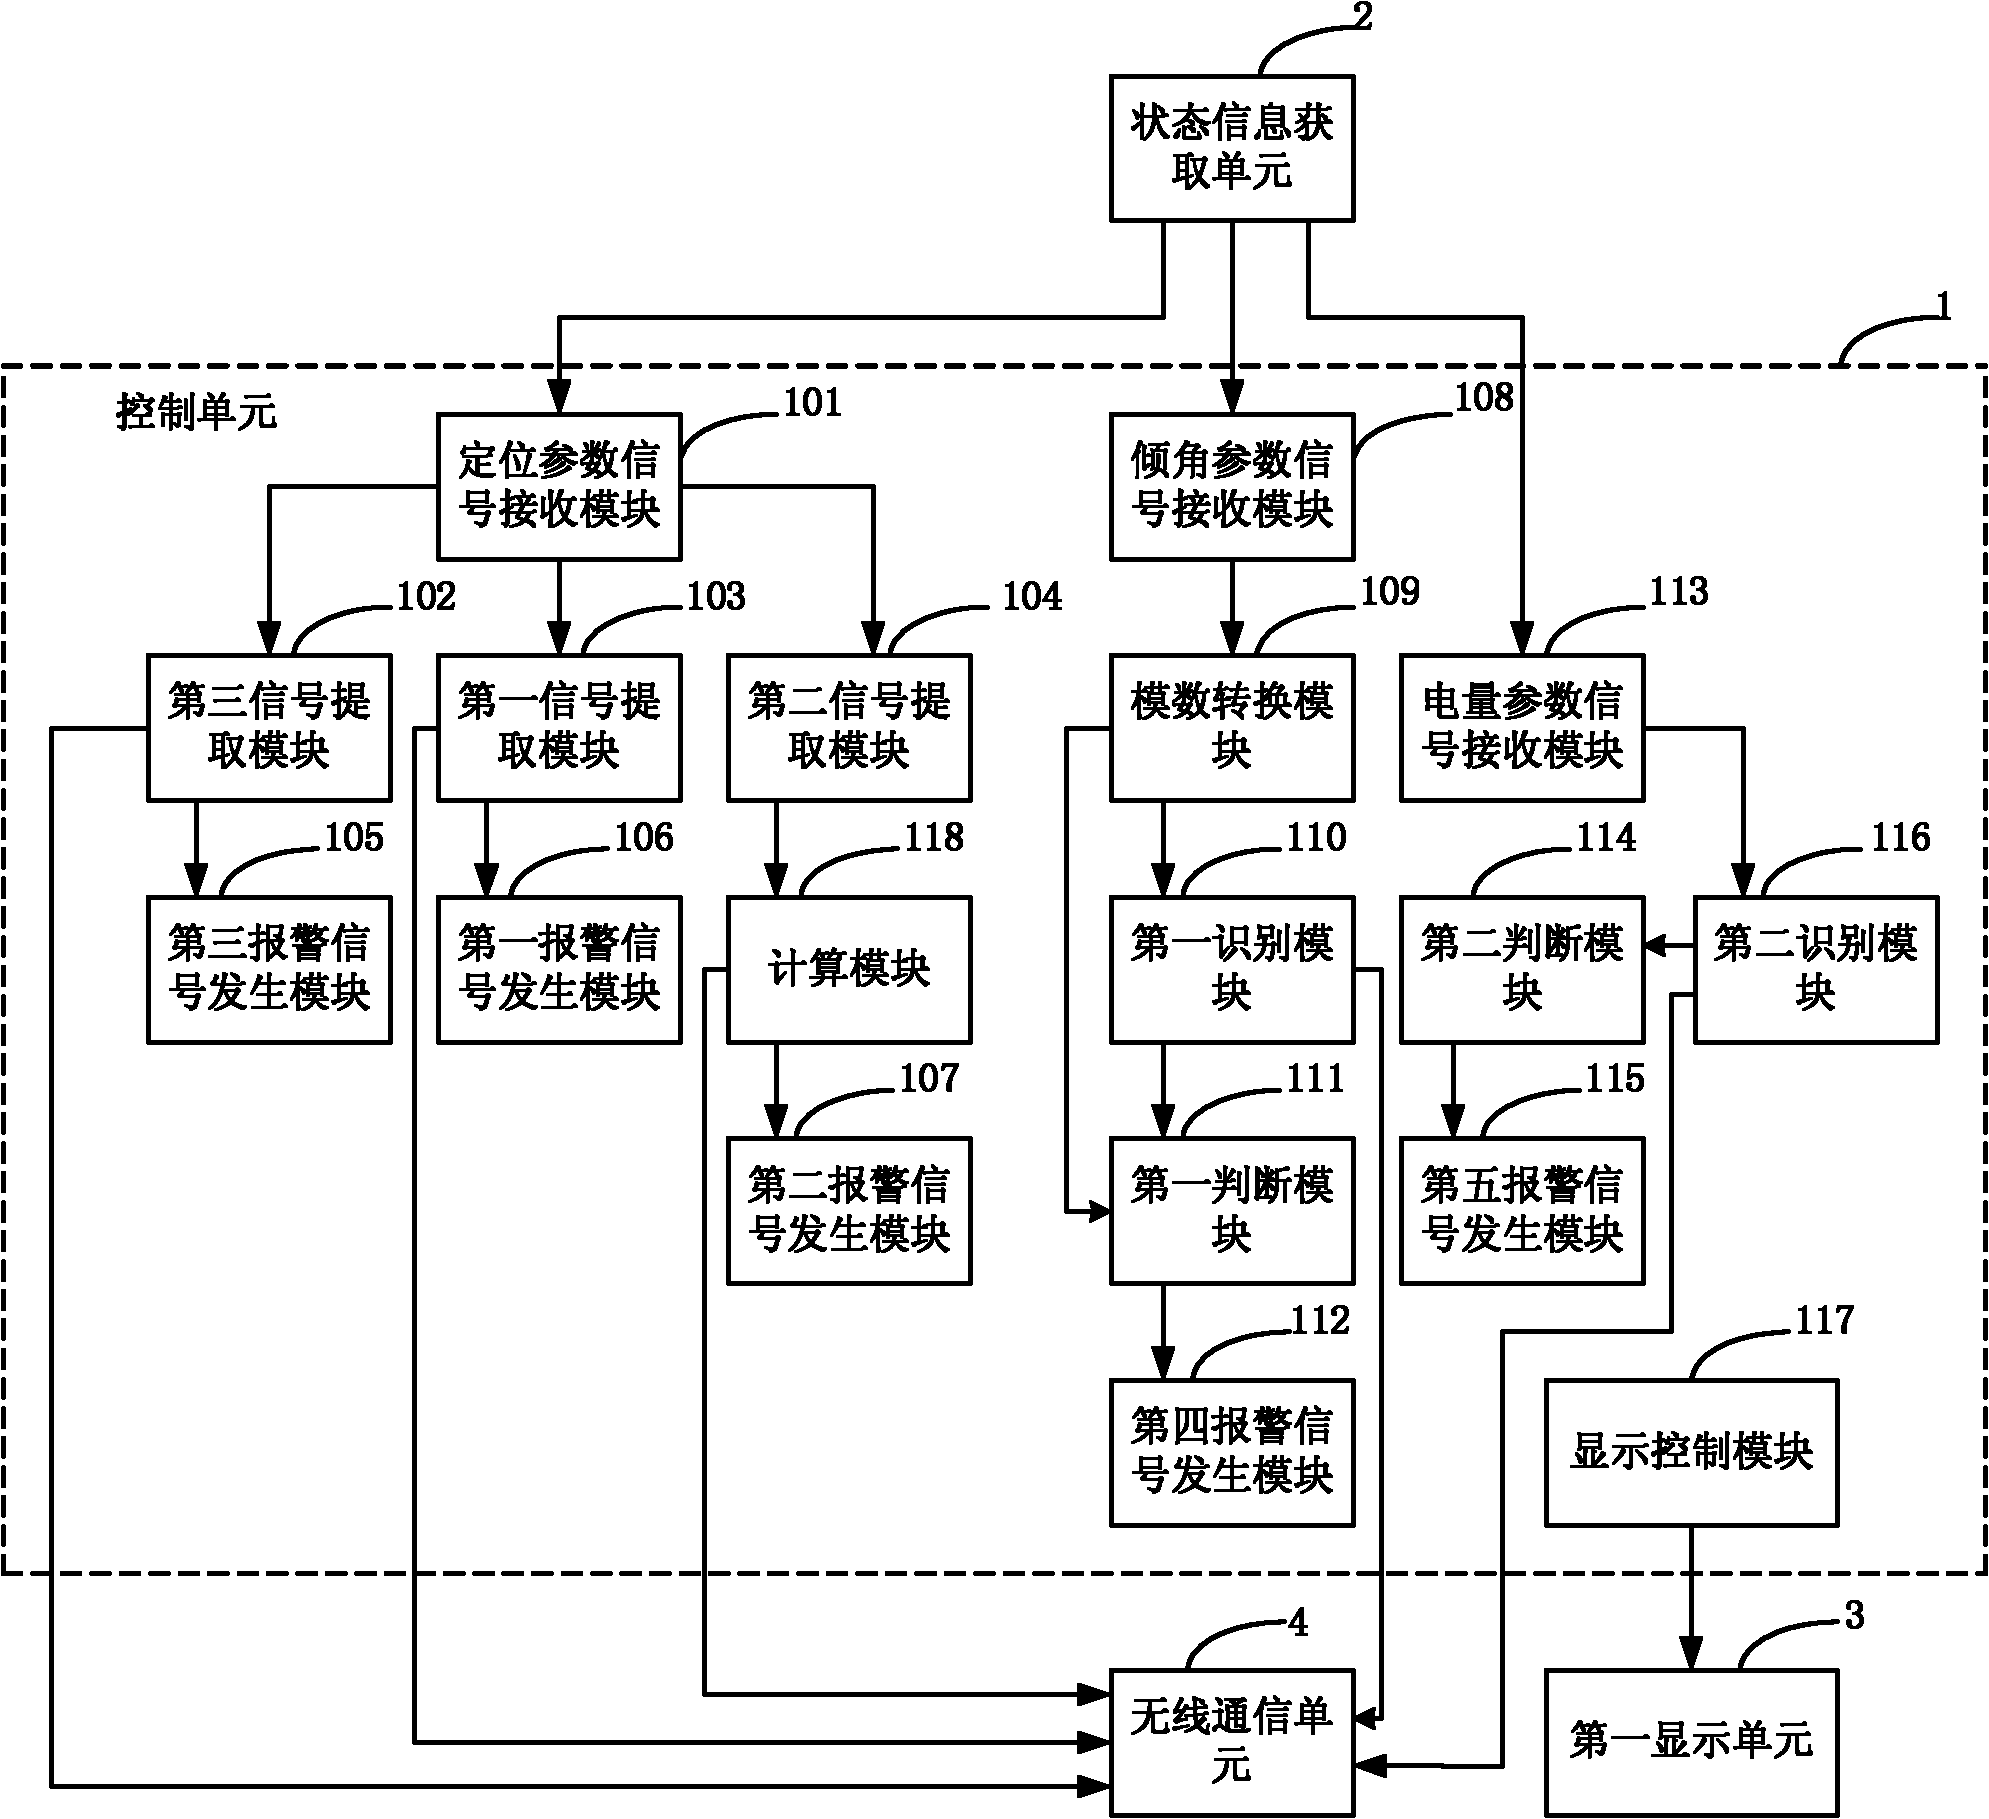 Yacht monitoring device and system